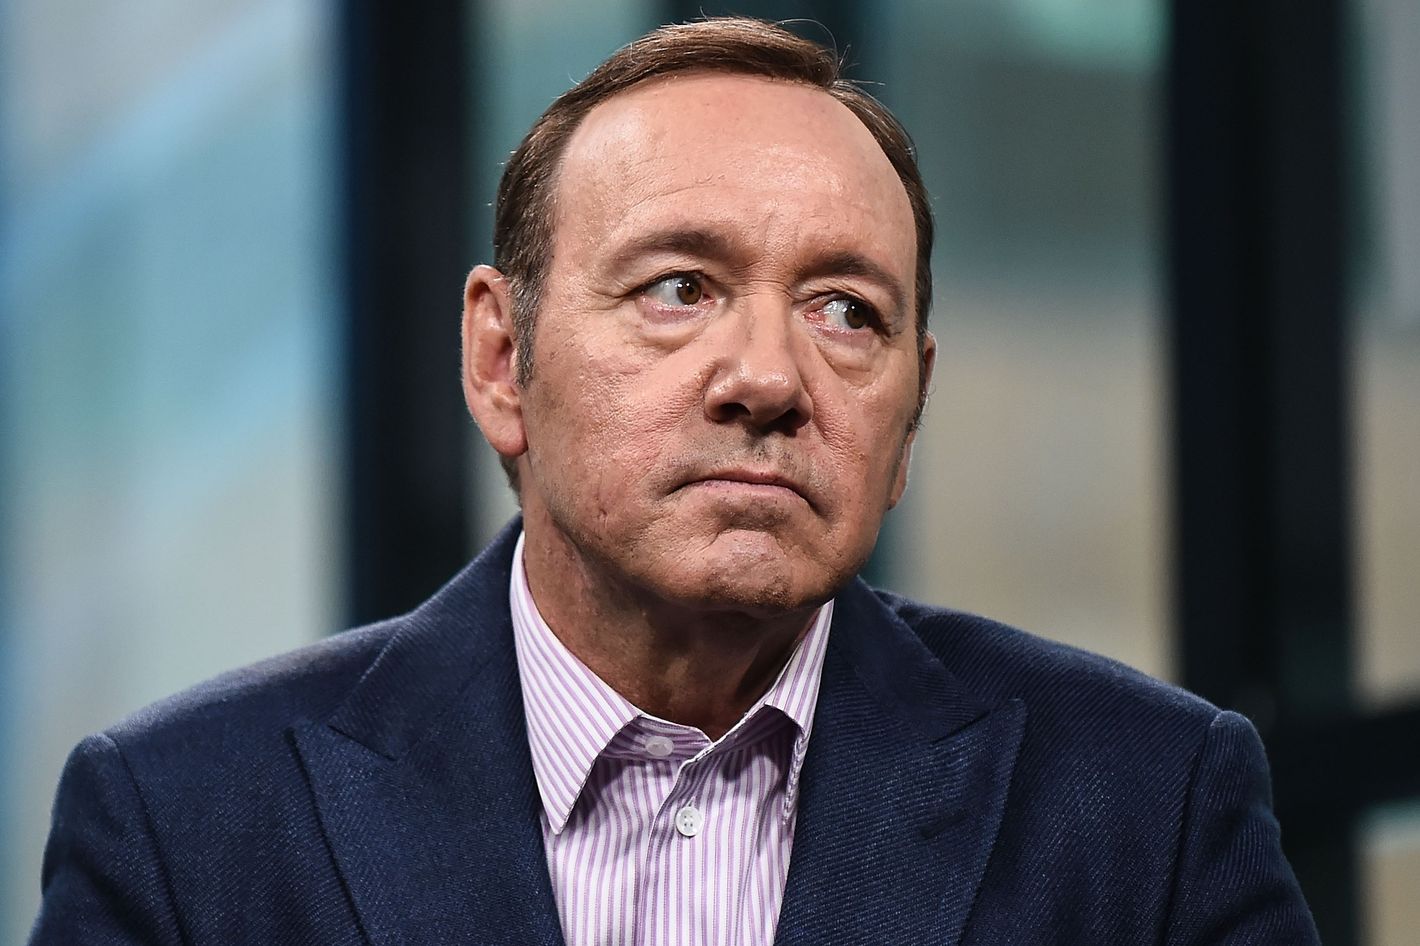 Kevin Spacey Man Alleges Sexual Relationship at 14 pic photo